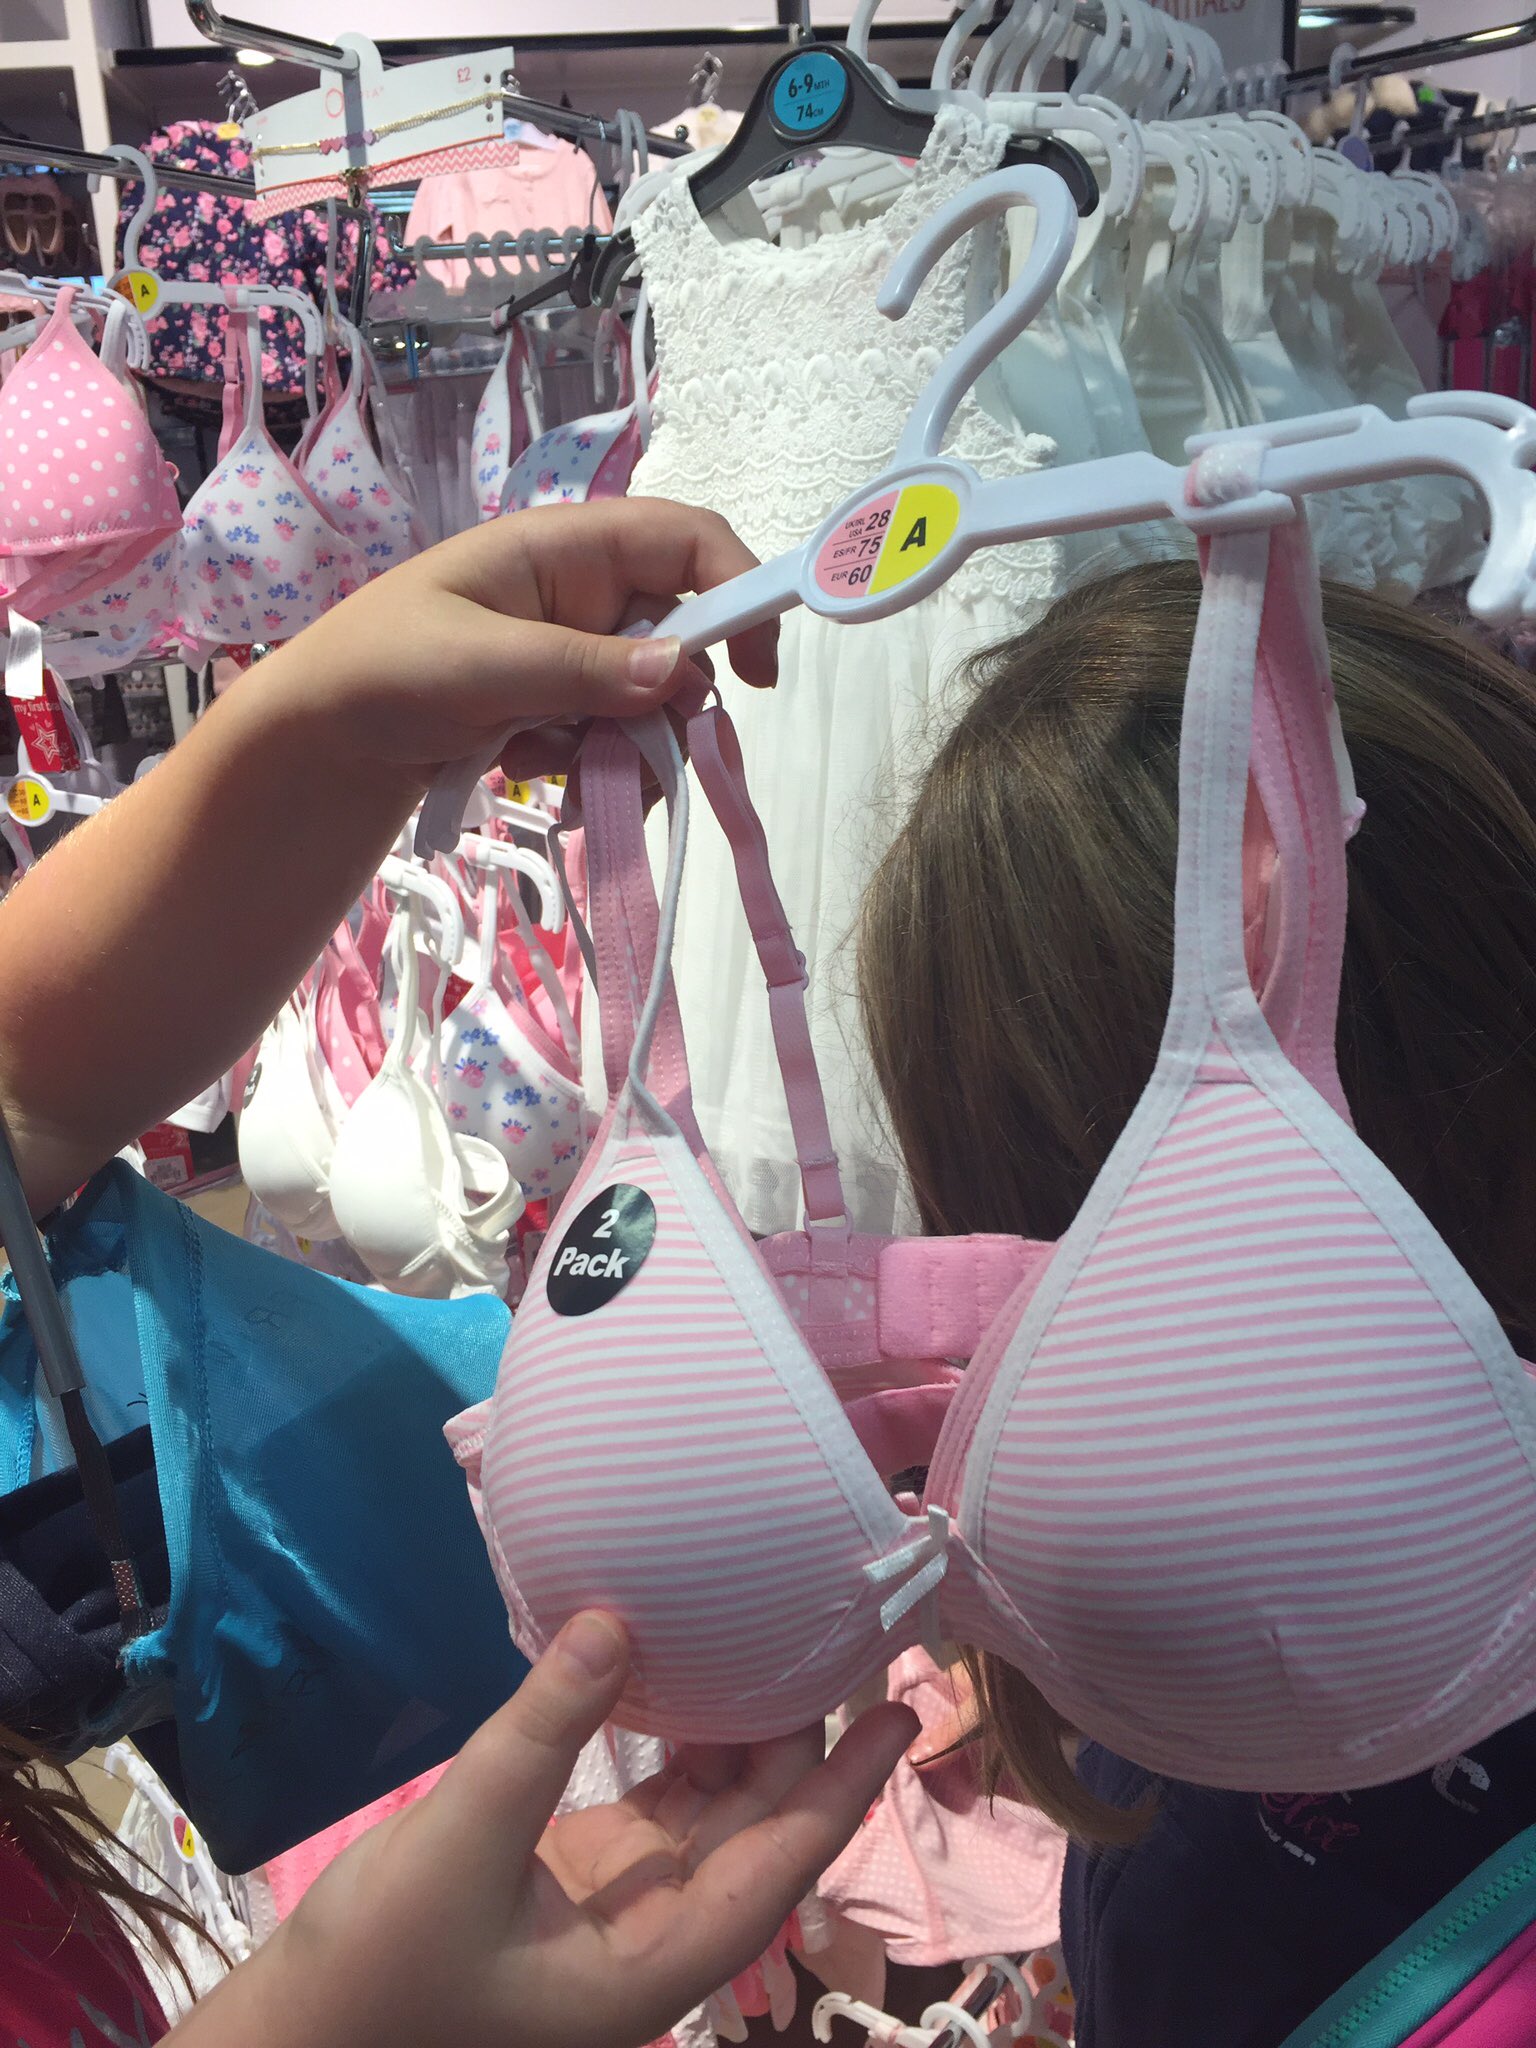 Emma's Cafe on X: @Primark why are you selling padded bras to